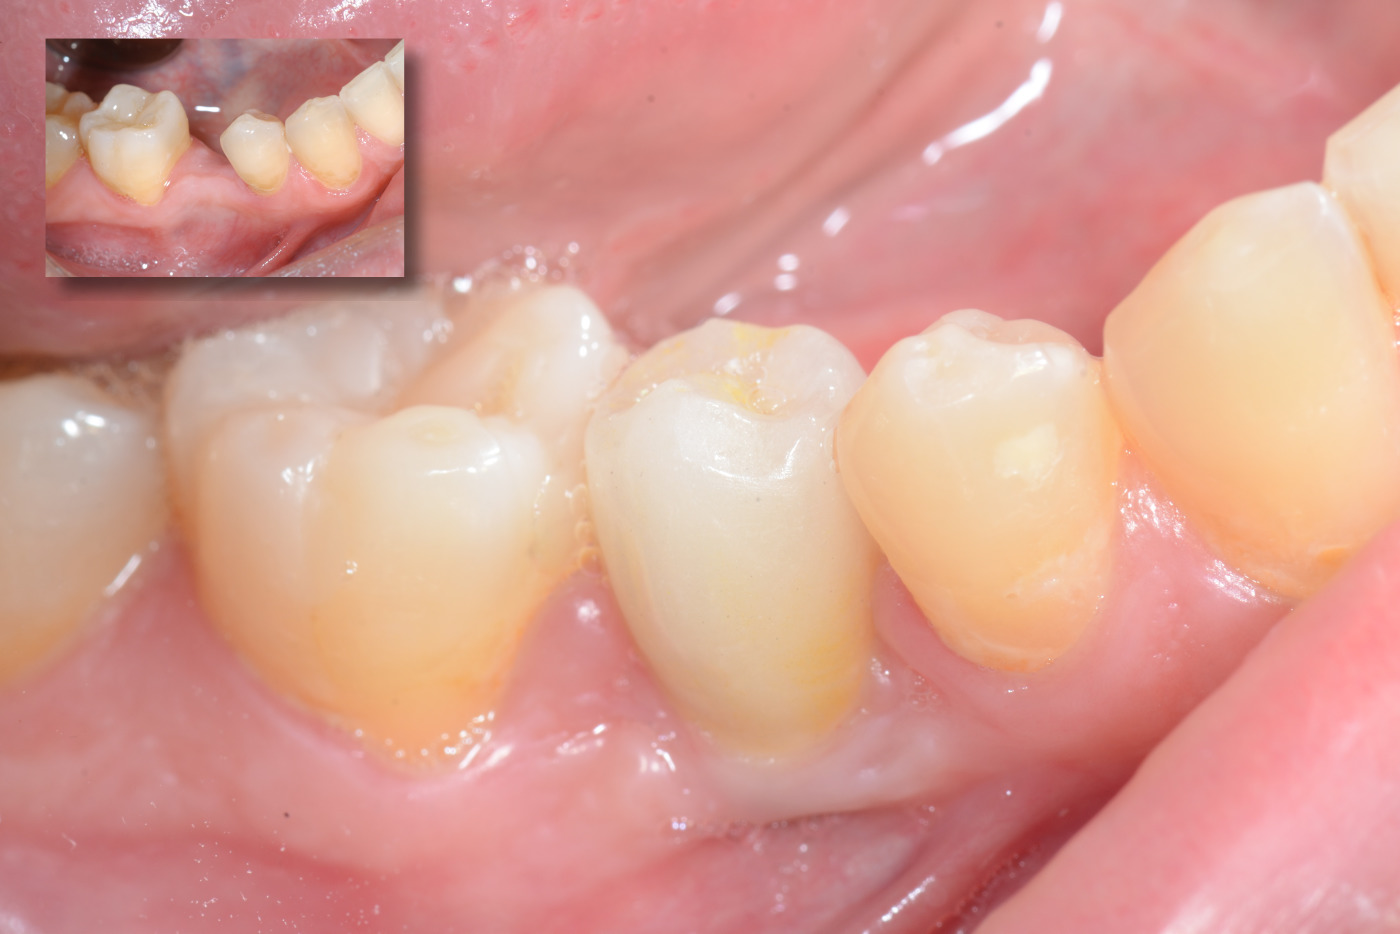 Before/After tooth implant